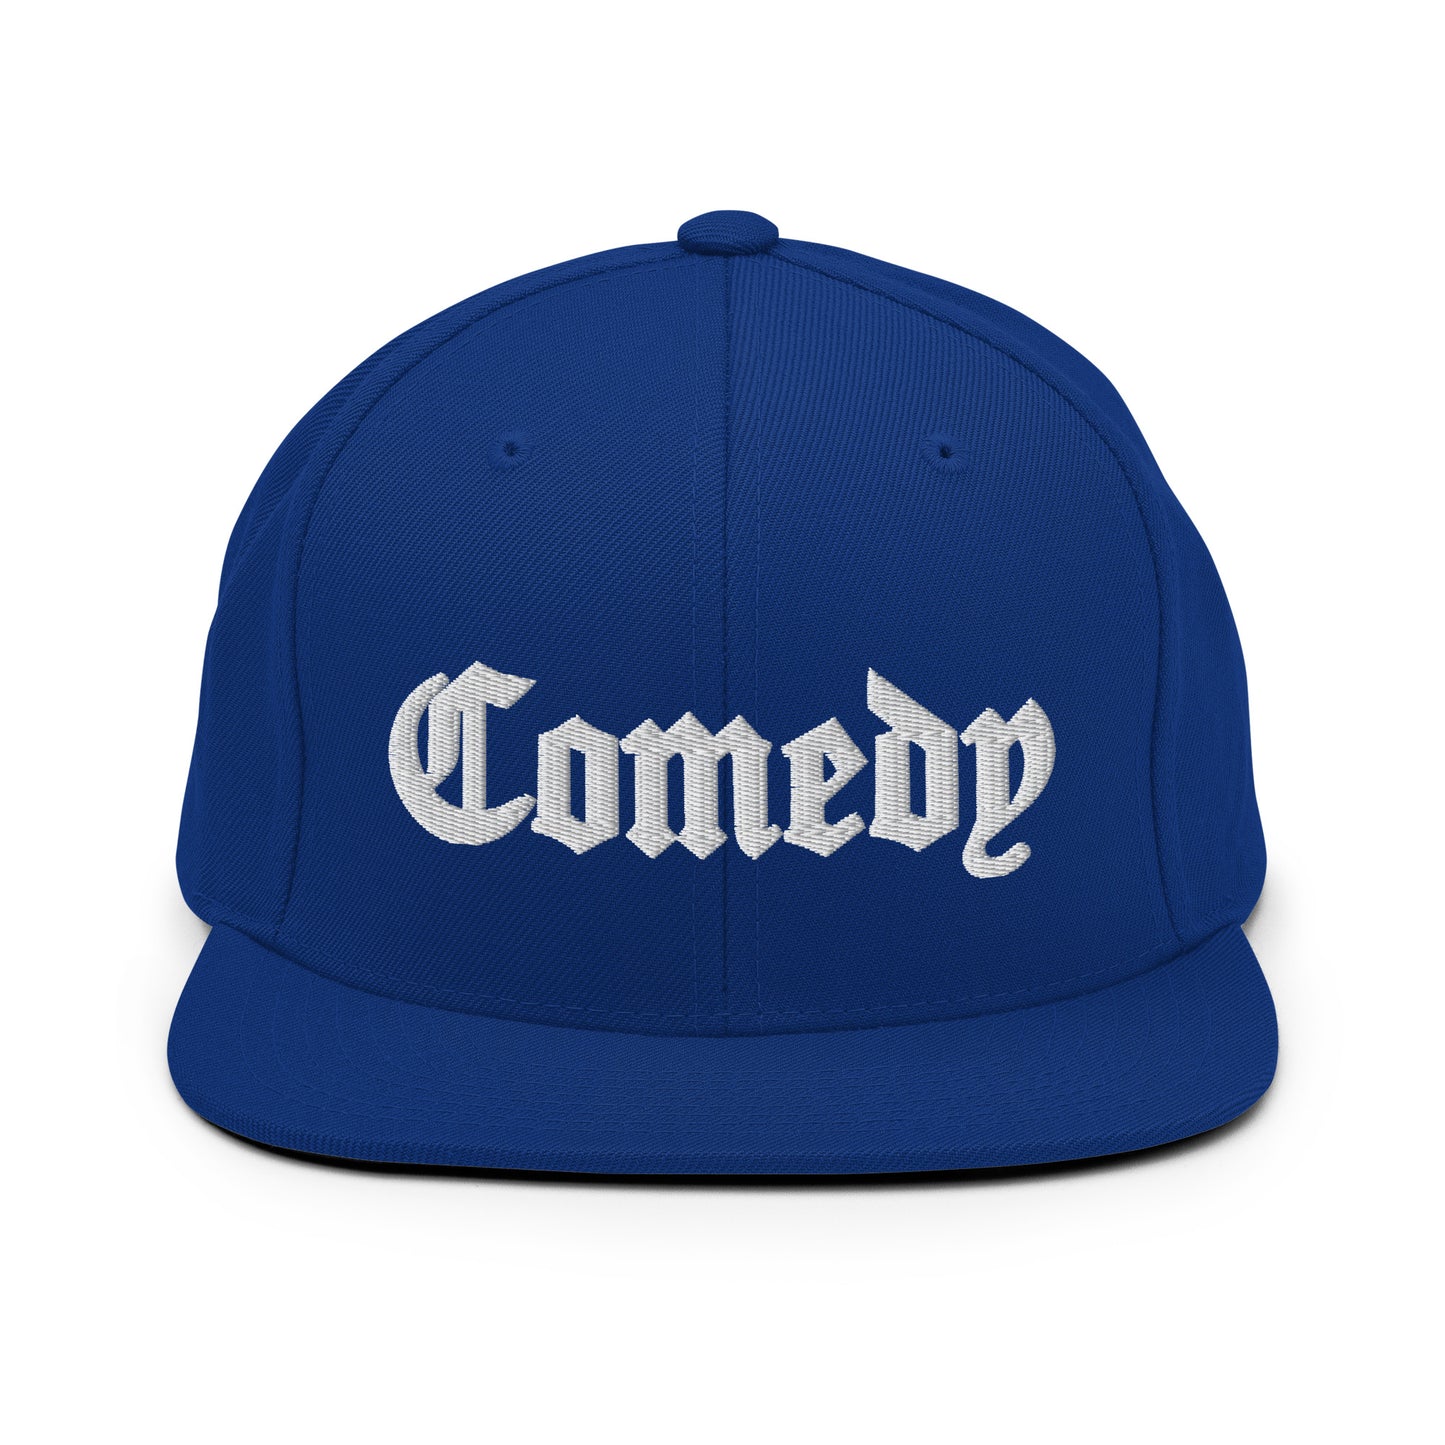 Blue Neighbor Snapback Hat - Comedy the Brand - Stand-Up Comedy Fan Gear